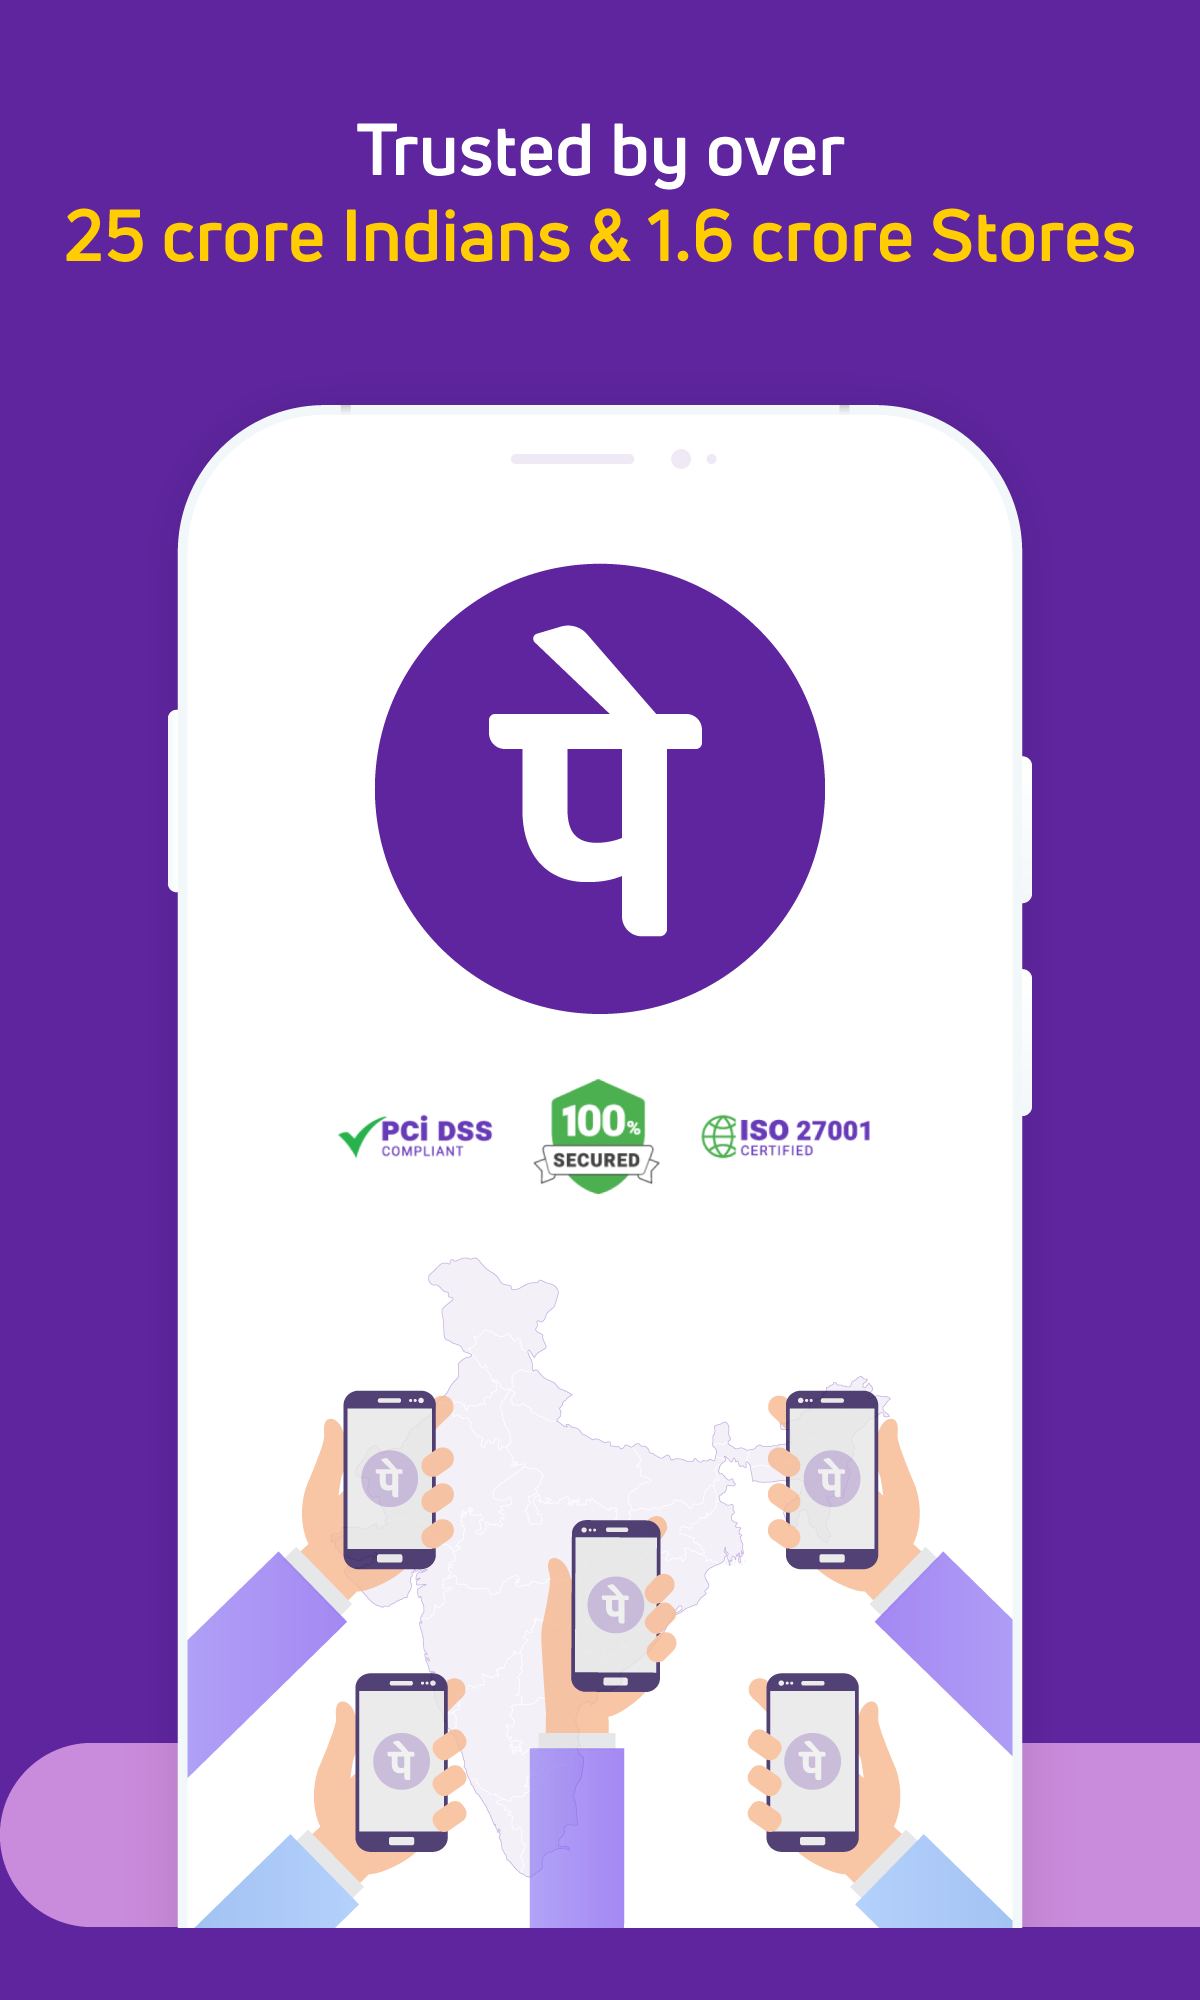 PhonePe: UPI, Recharge, Investment, Insurance 